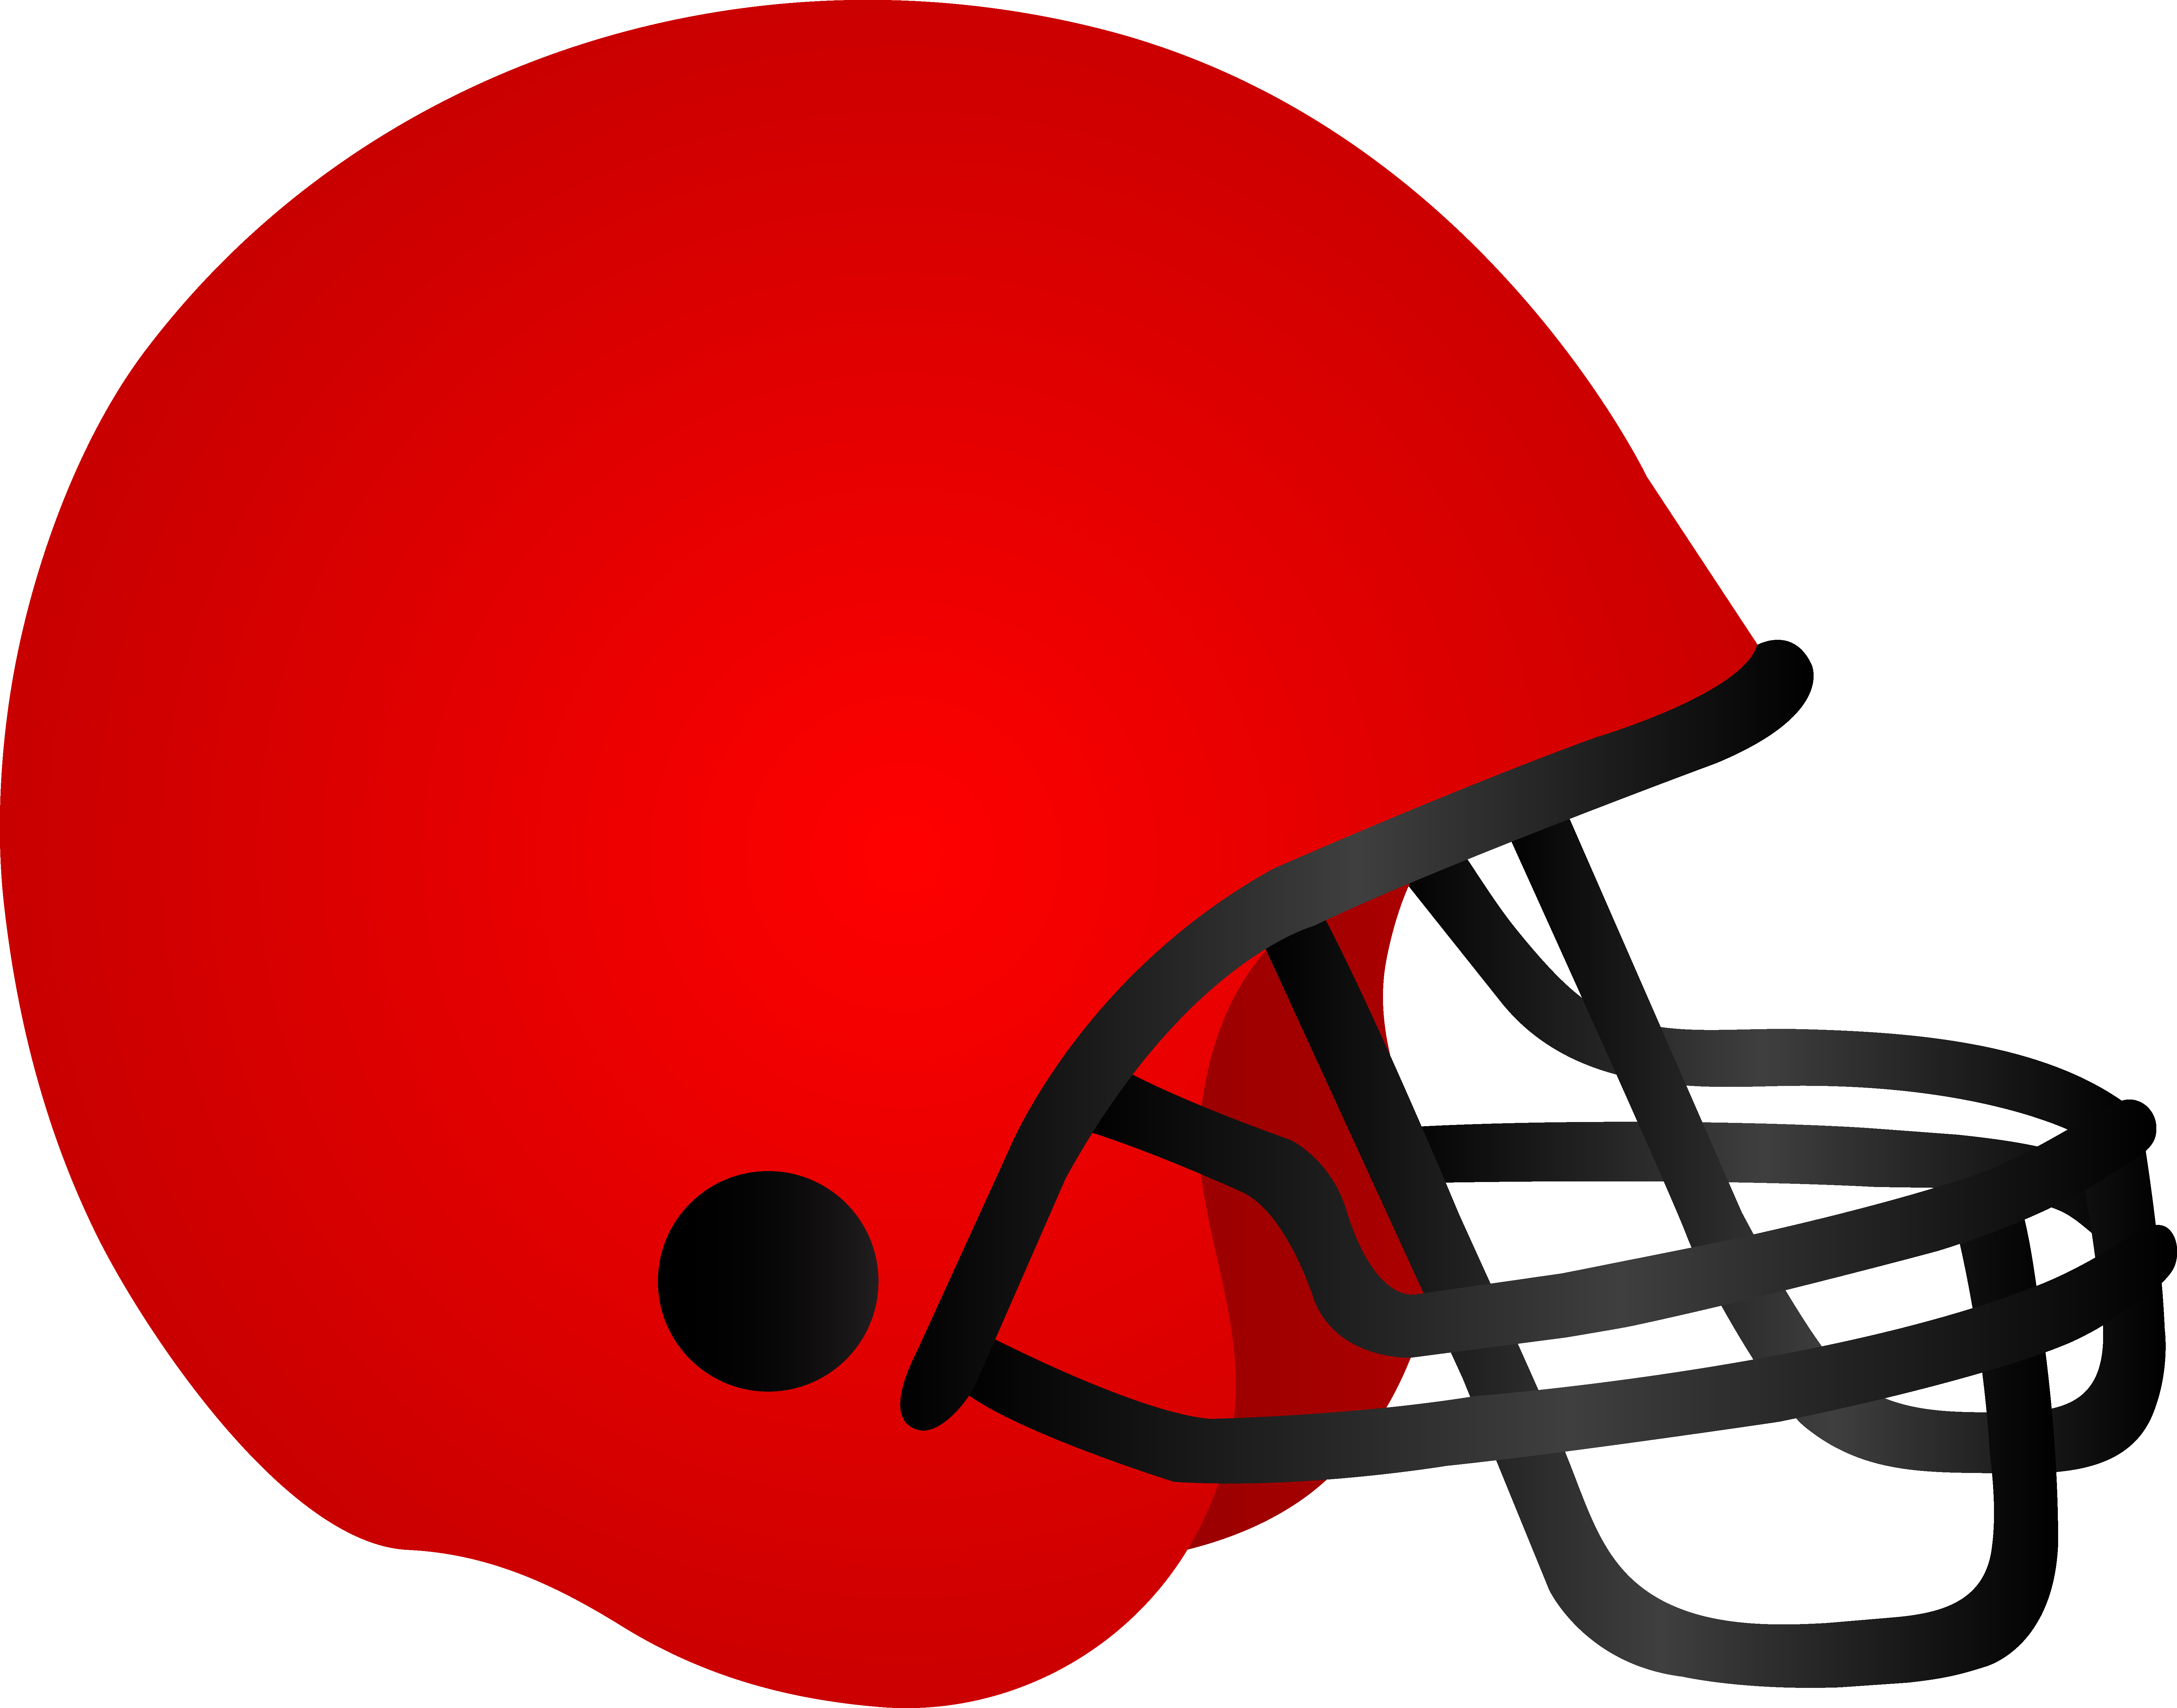 Football Helmet Front | Clipart Panda - Free Clipart Images